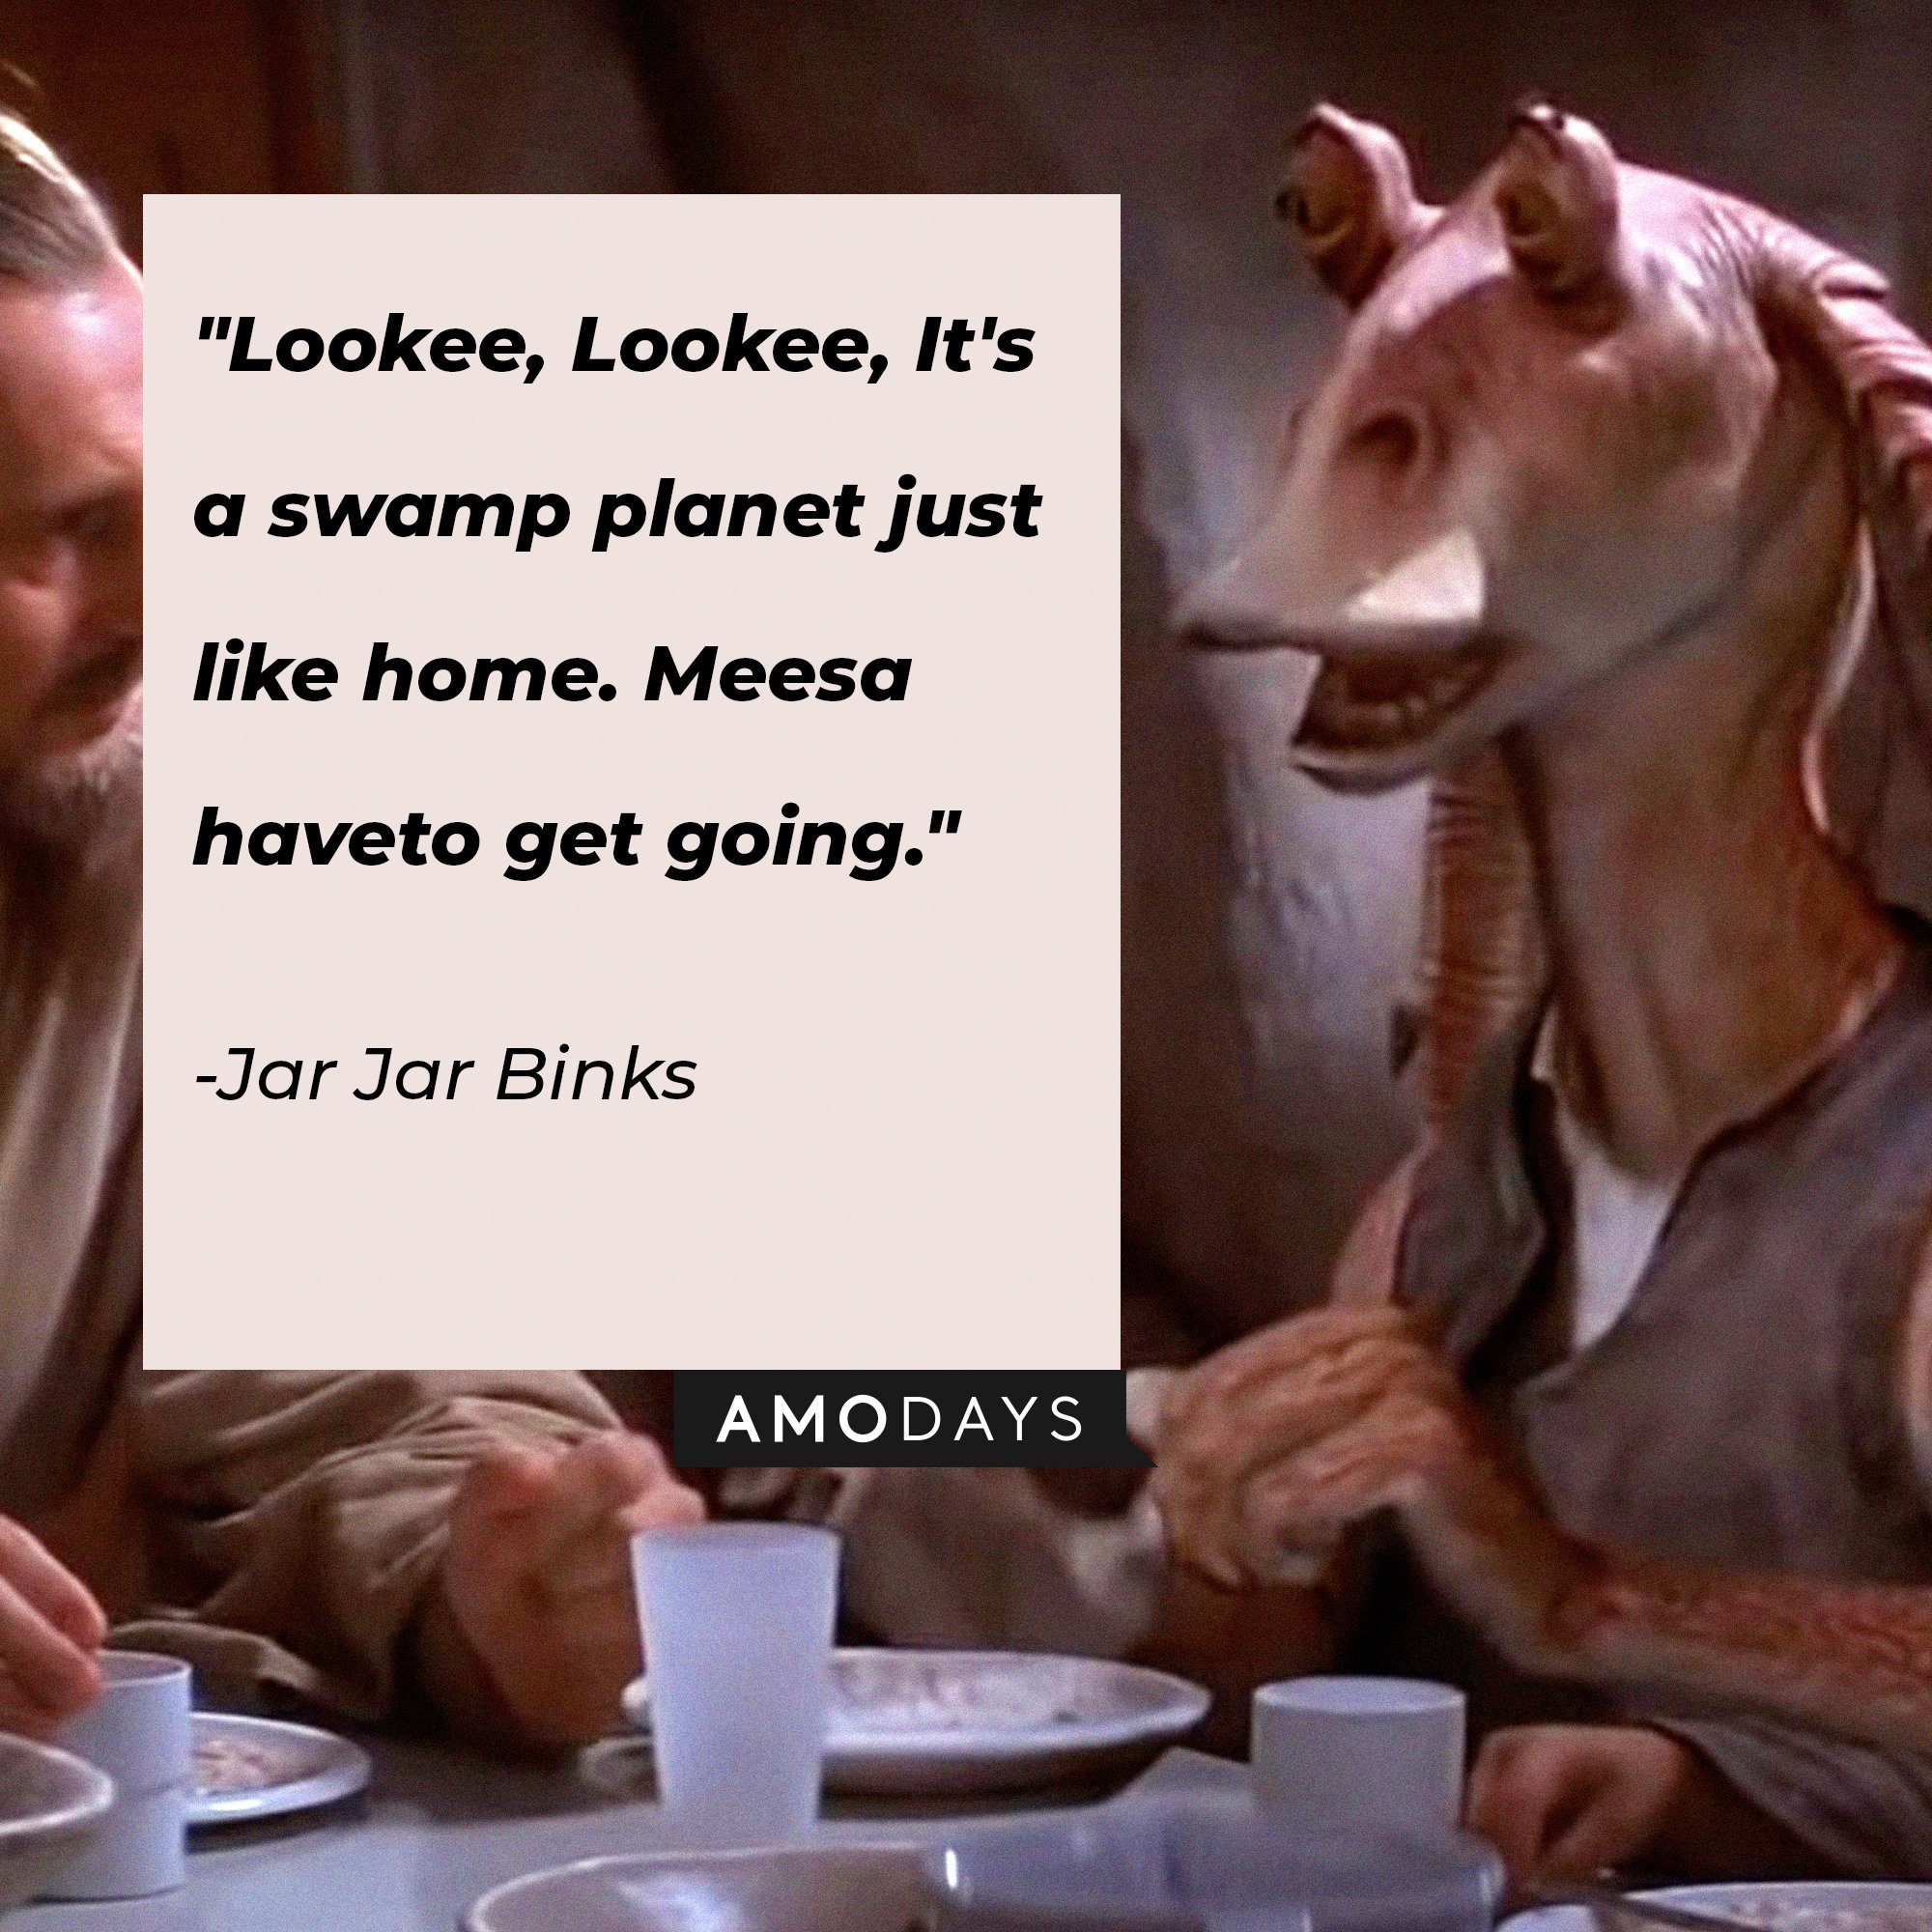  Jar Jar Binks’ quote: "Lookee, Lookee, It's a swamp planet just like home. Meesa have to get going." | Image: AmoDays